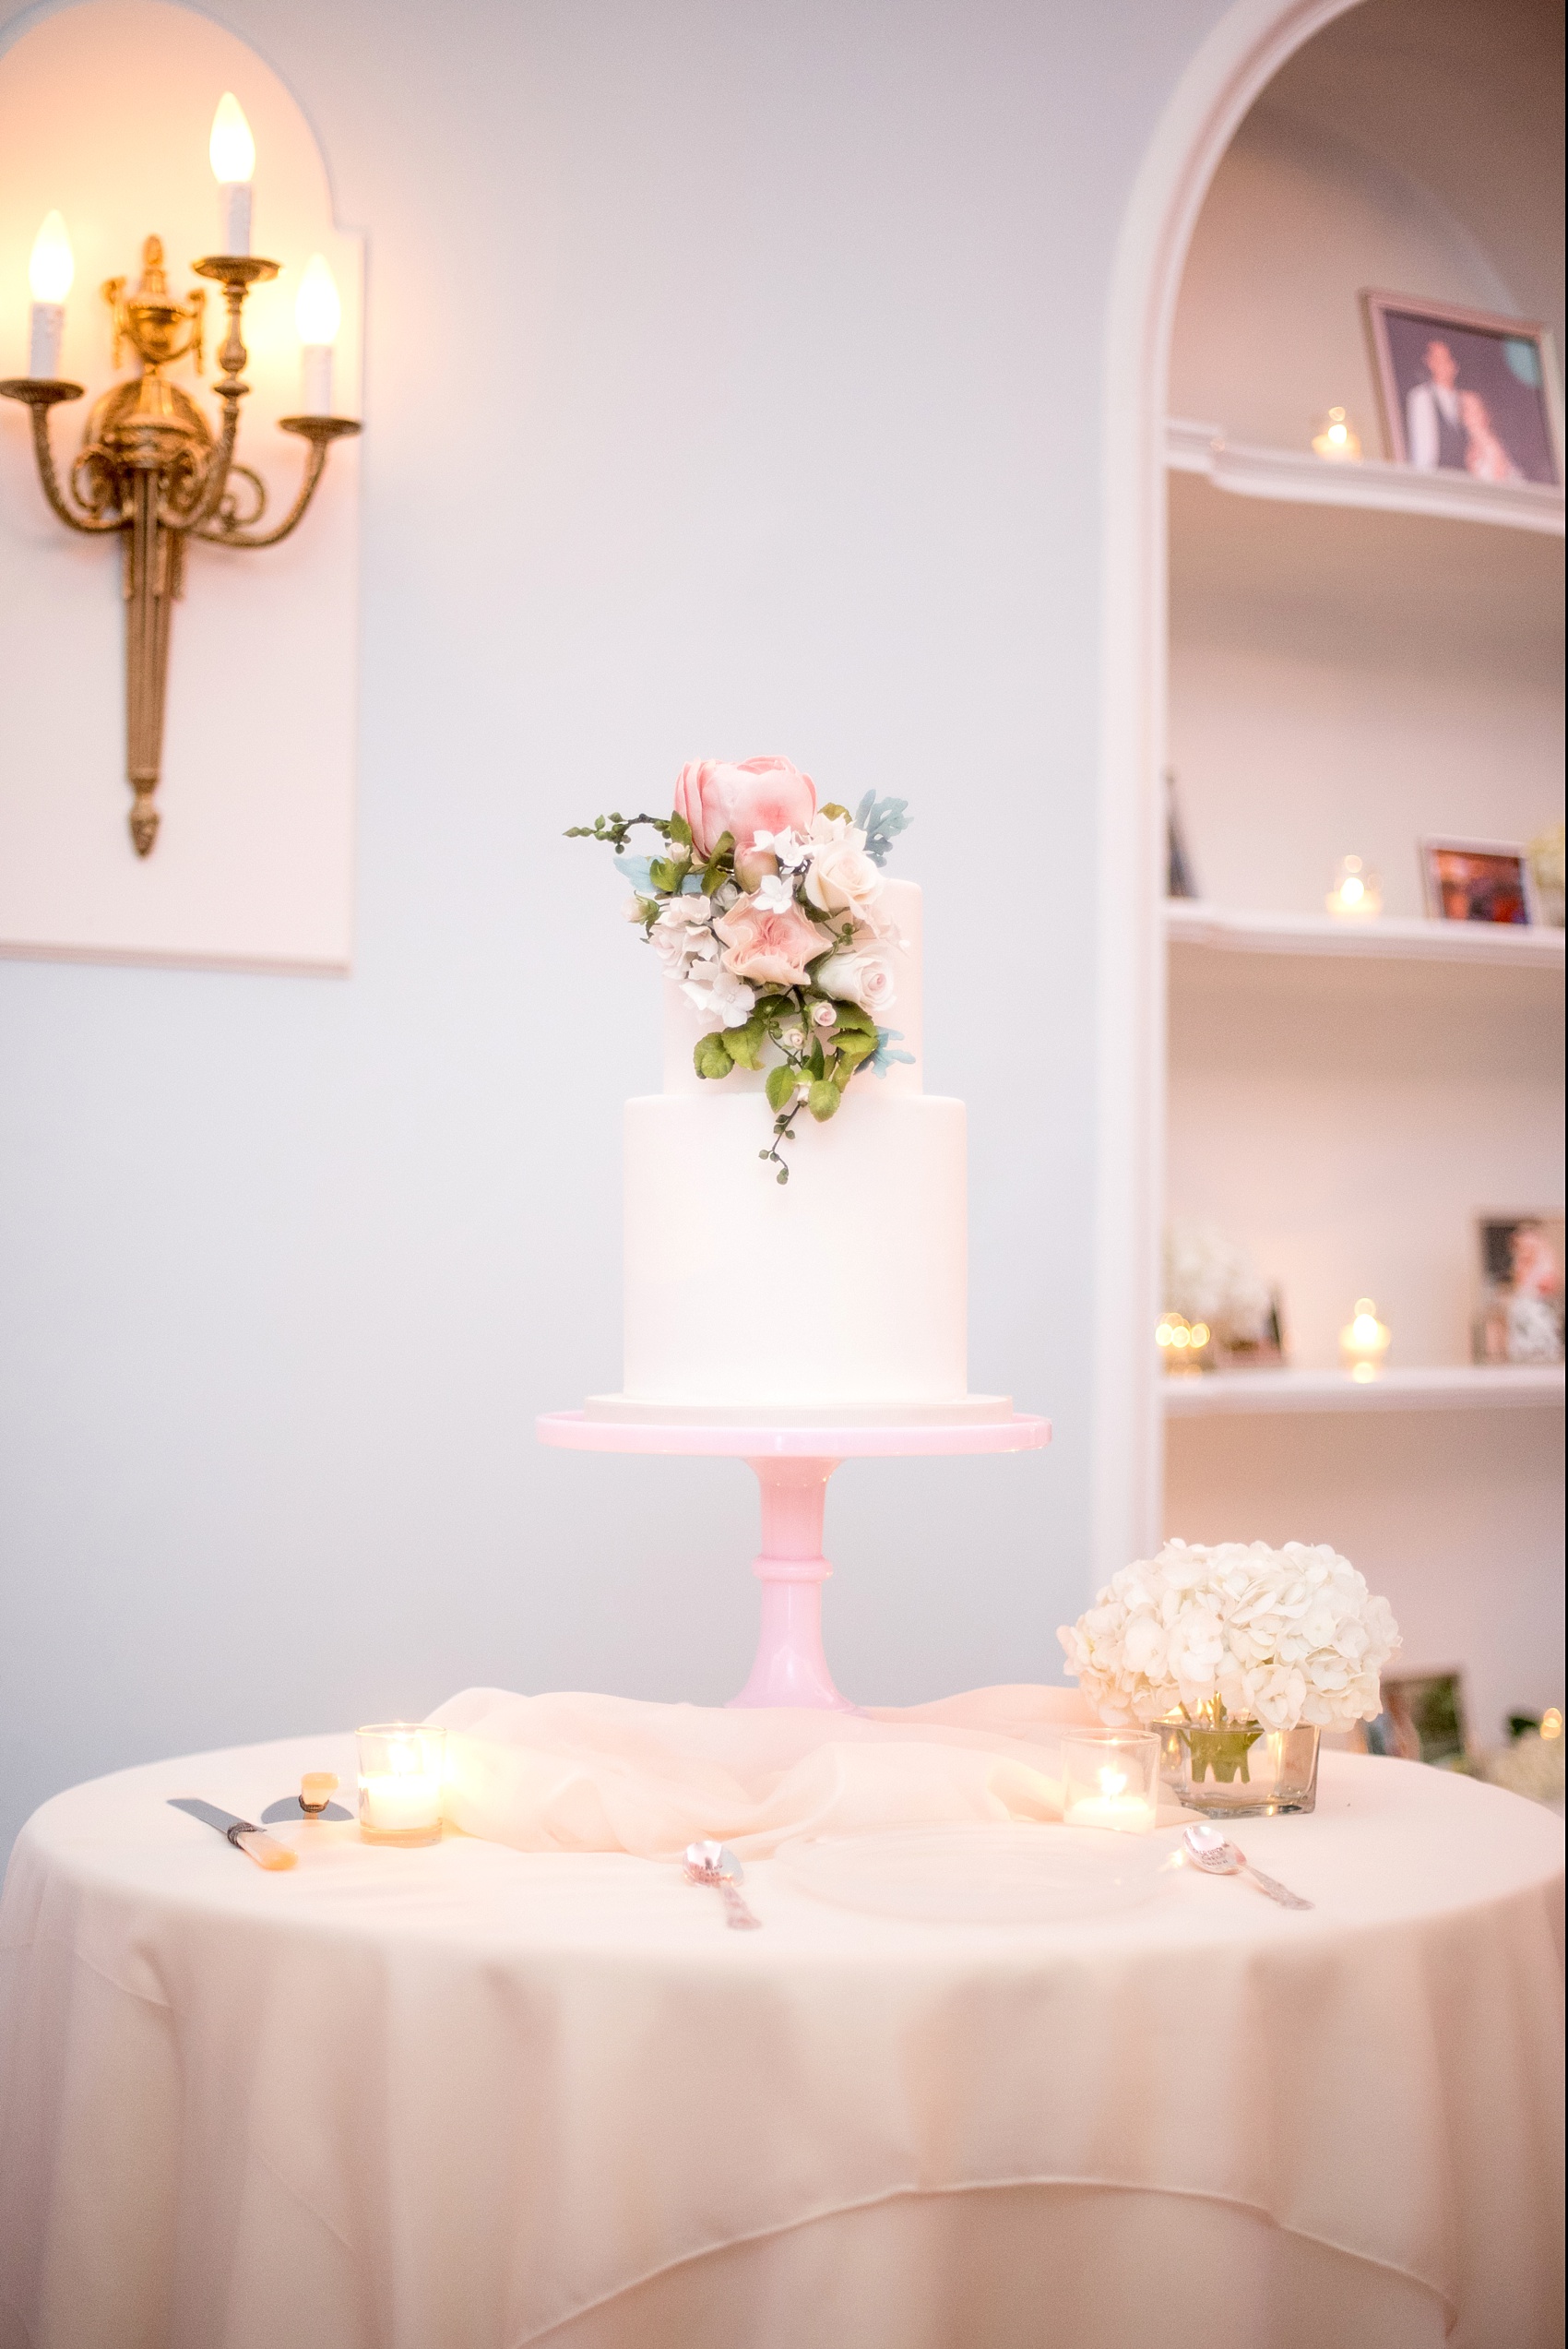 Mikkel Paige Photography photos of a luxury wedding in NYC. Image of India House reception and elegant white tiered cake with gumpaste flowers by Madison Lee.